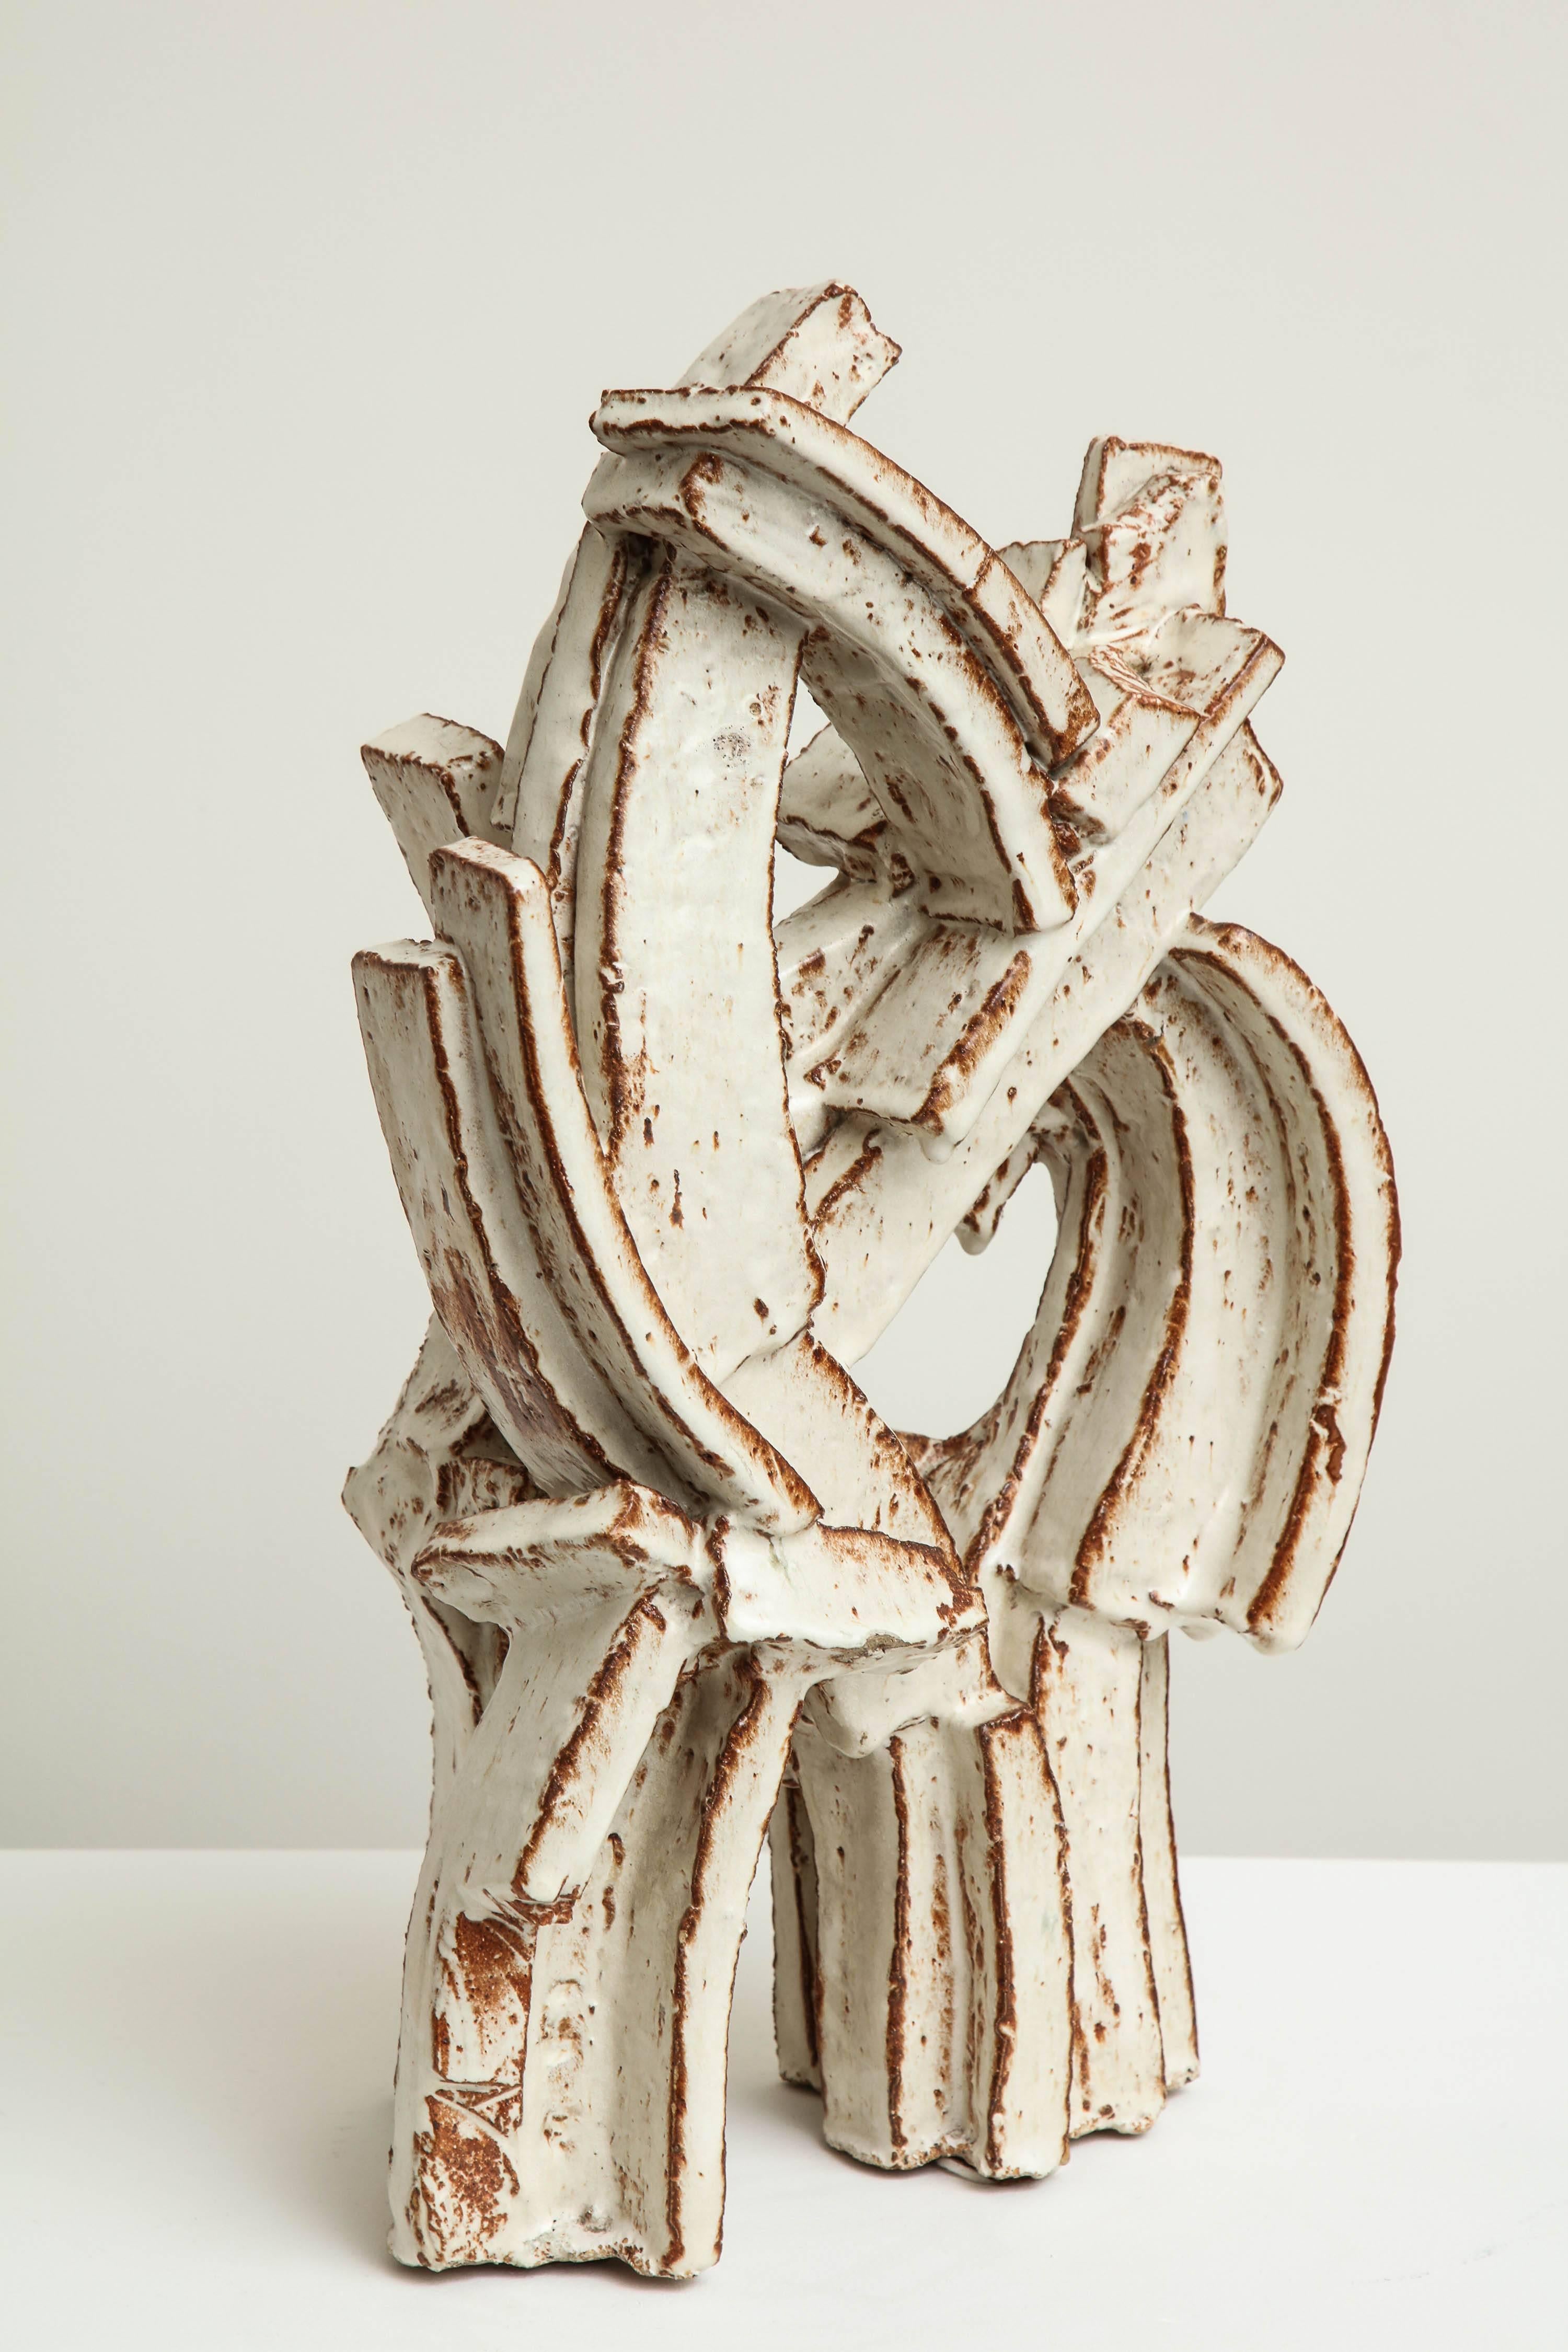 Beautiful ceramic sculpture by one of 20th century foremost Swedish artists, Hertha Hillfon.


Hertha Hillfon (Swedish, 1921–2013)
Ceramic sculpture, circa 1965
Stoneware, white glaze
Measures: 23